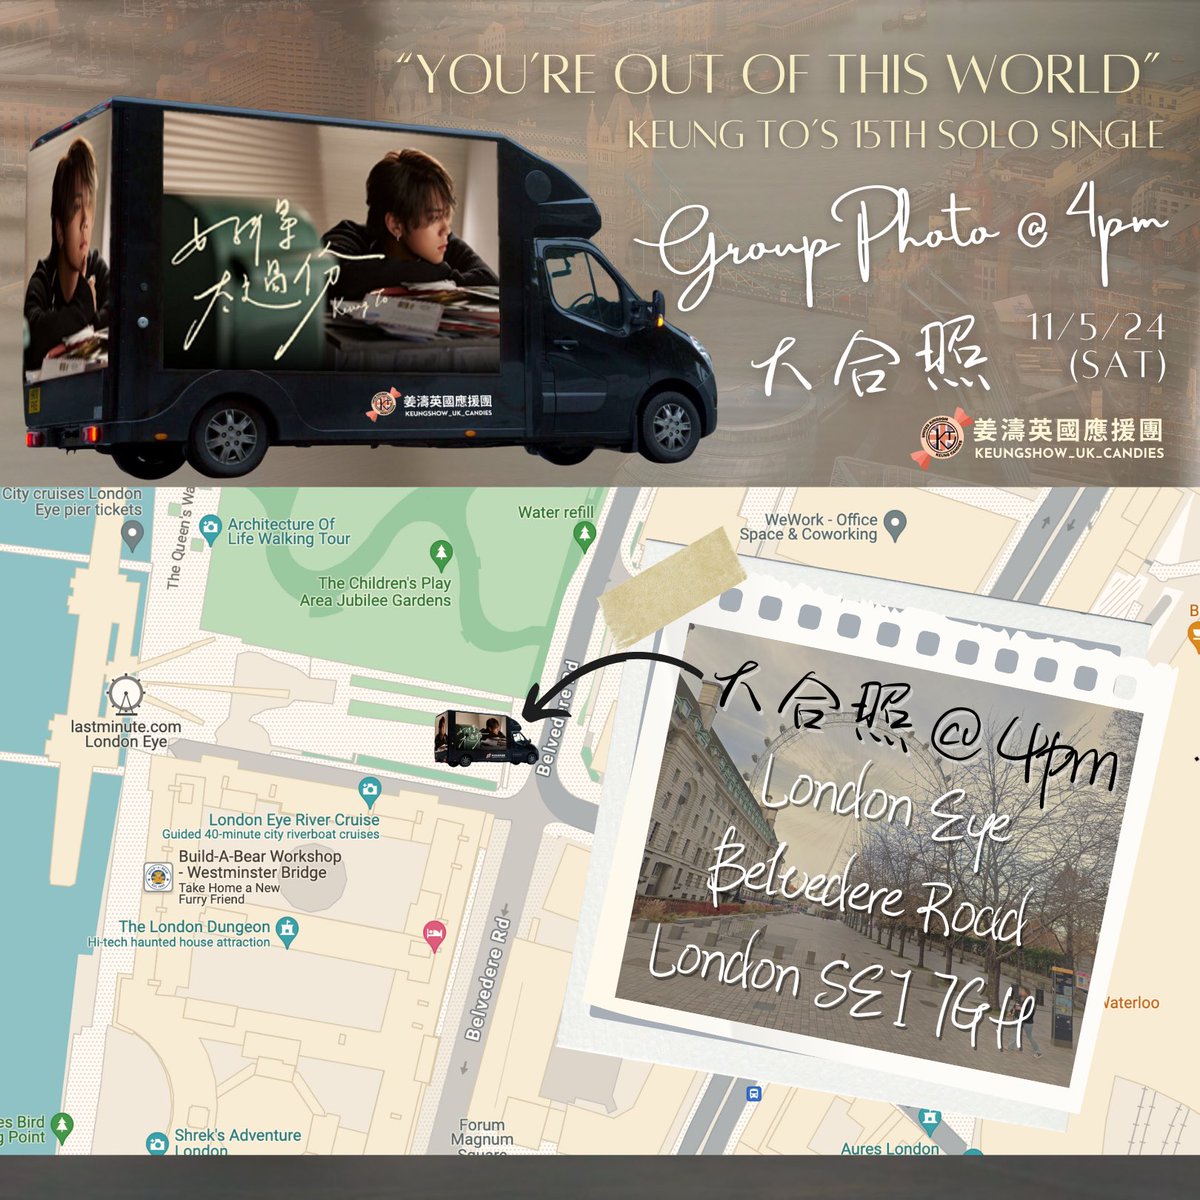 🇬🇧❤️ Keung To’s 15th solo single,《好得太過份'》(You’re out of this world), will be featured on a digital truck 🚚 around central #London from 12 PM to 8 PM! See you all tomorrow! 🥰

#KeungTo #姜濤
#好得太過份 #YoureOutOfThisWorld
#cantopop